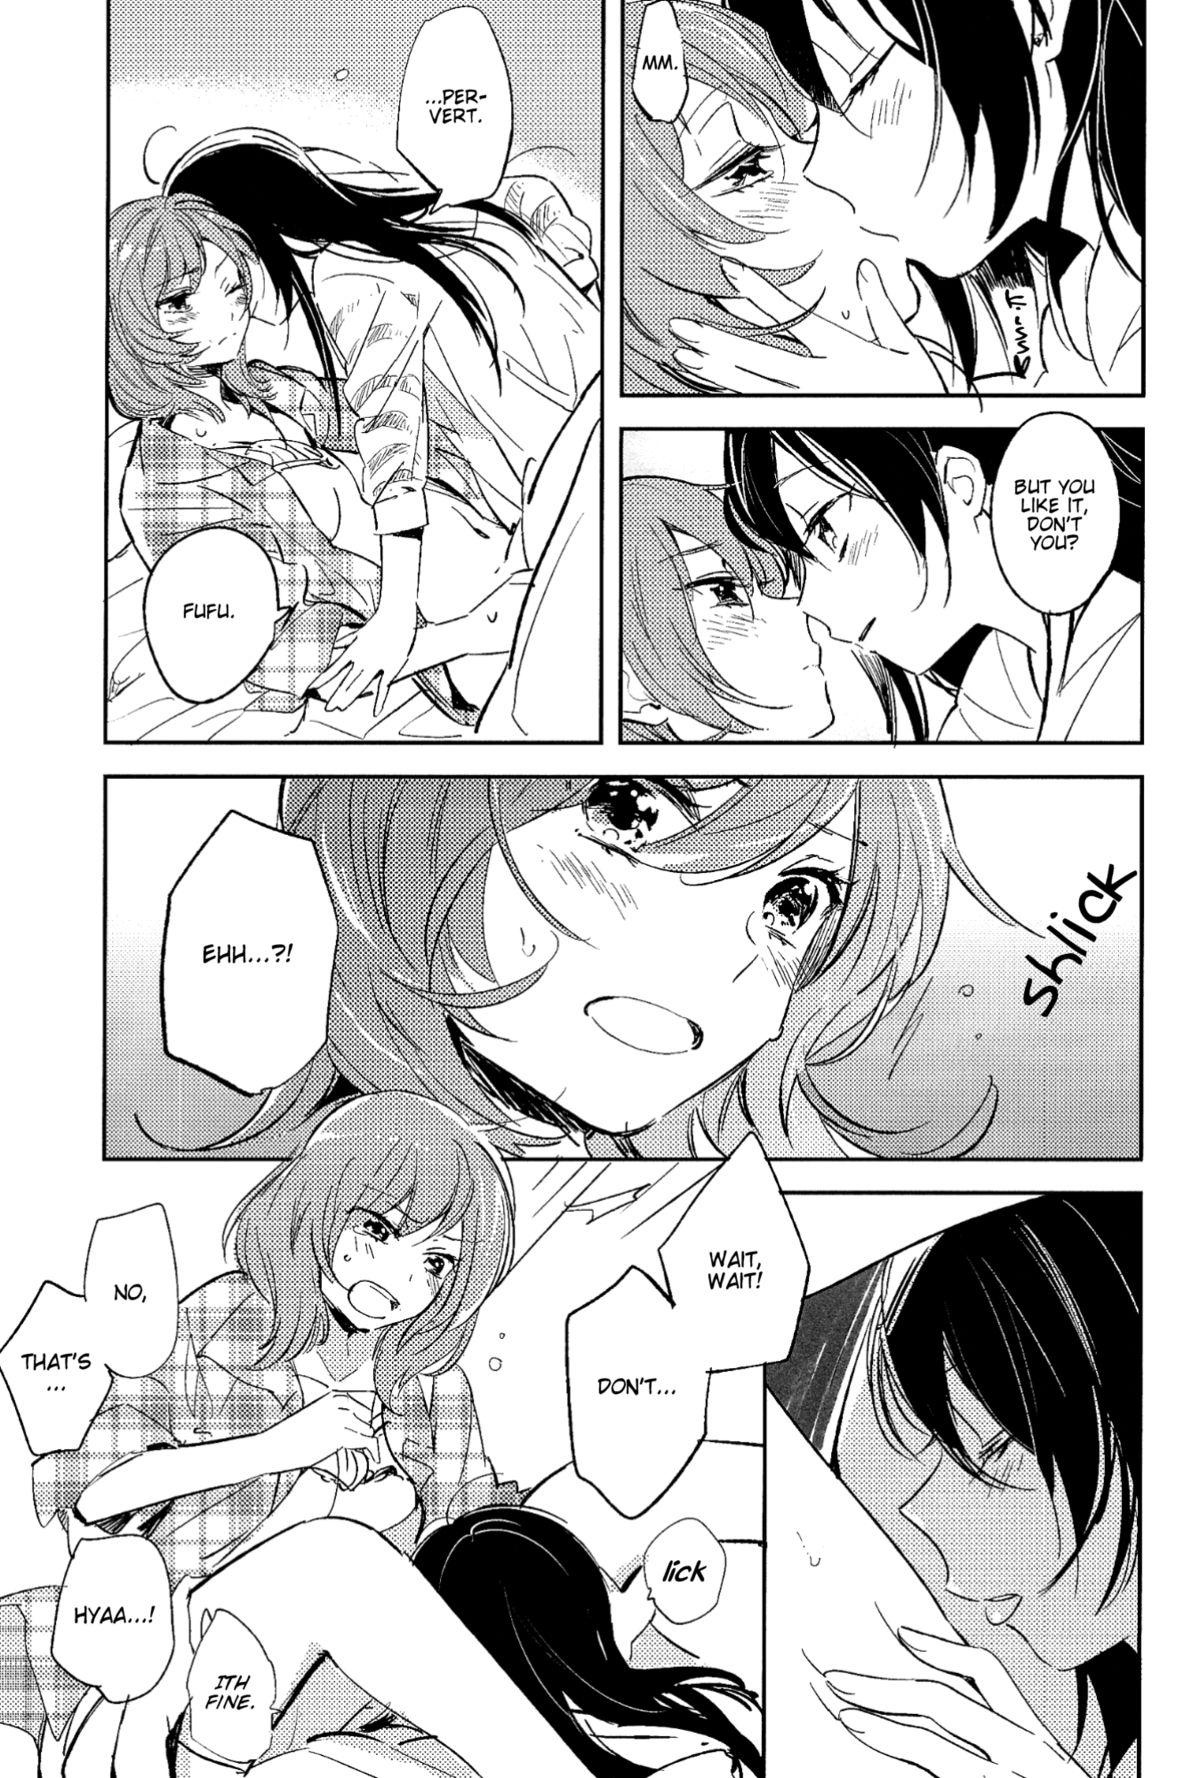 Alone Koibito no Jikan | Time for Lovers - Love live Amateur Sex - Page 11